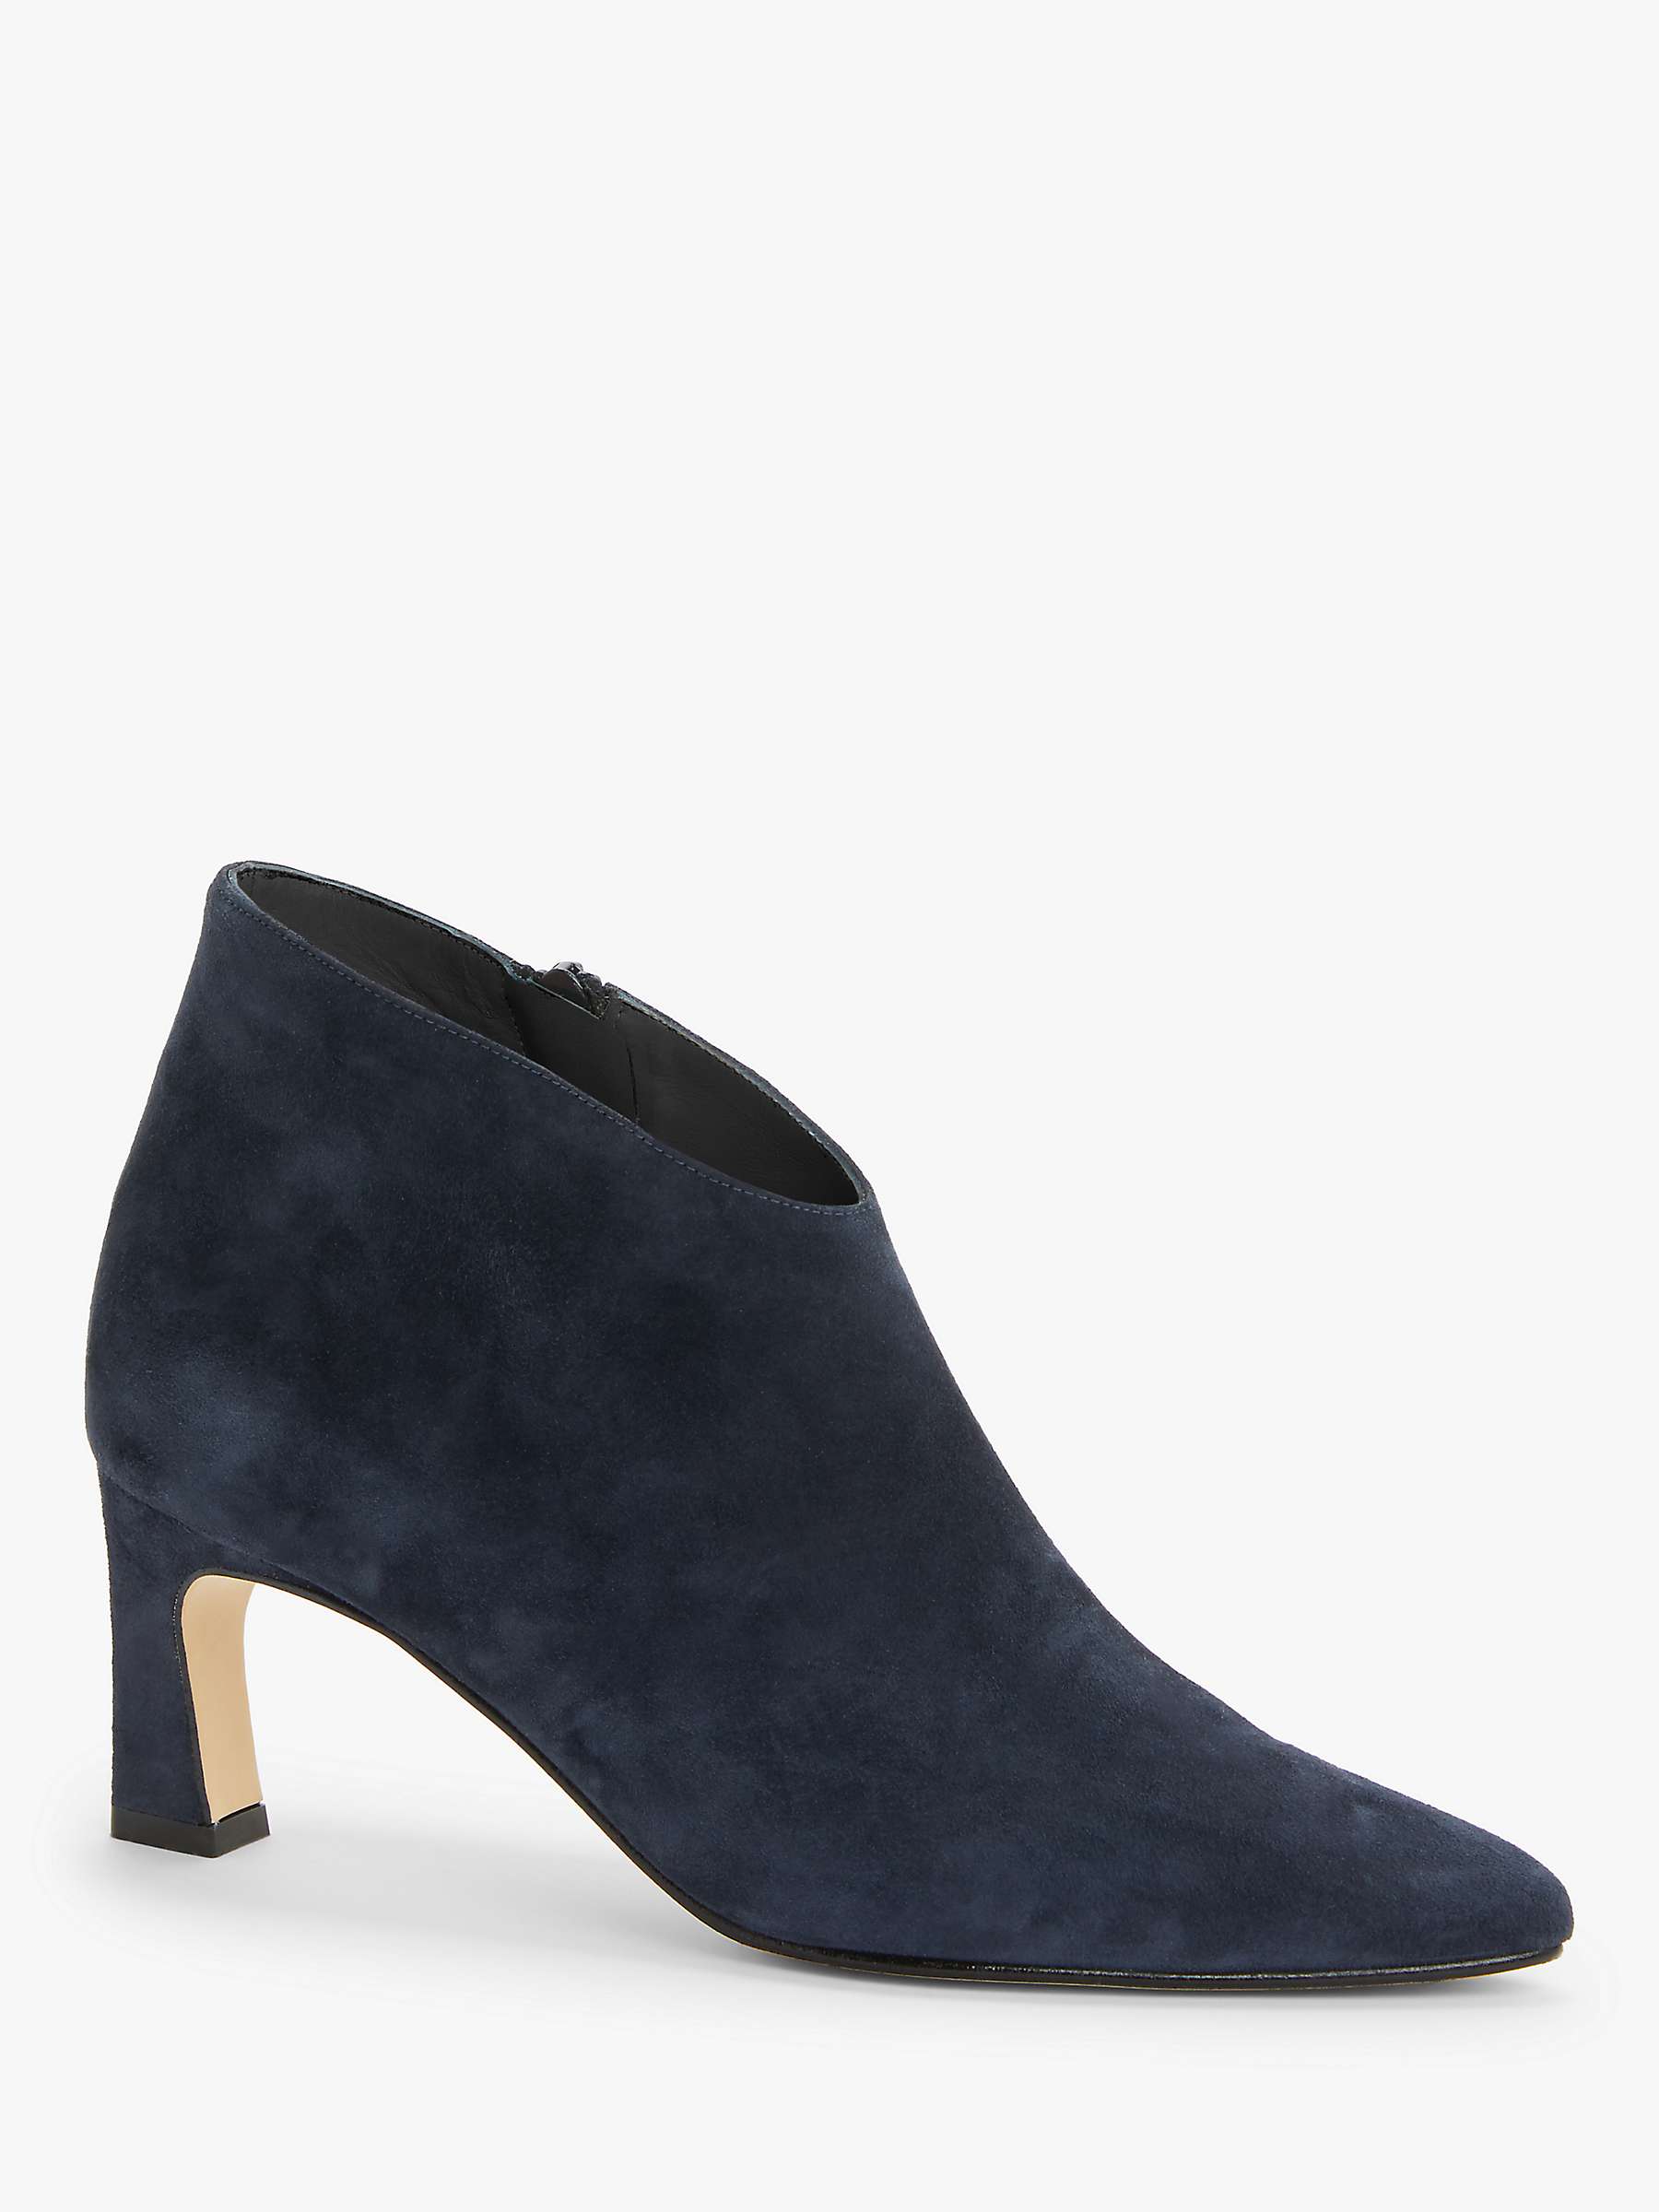 Buy John Lewis Waverly Suede Shoe Boots, Navy Online at johnlewis.com